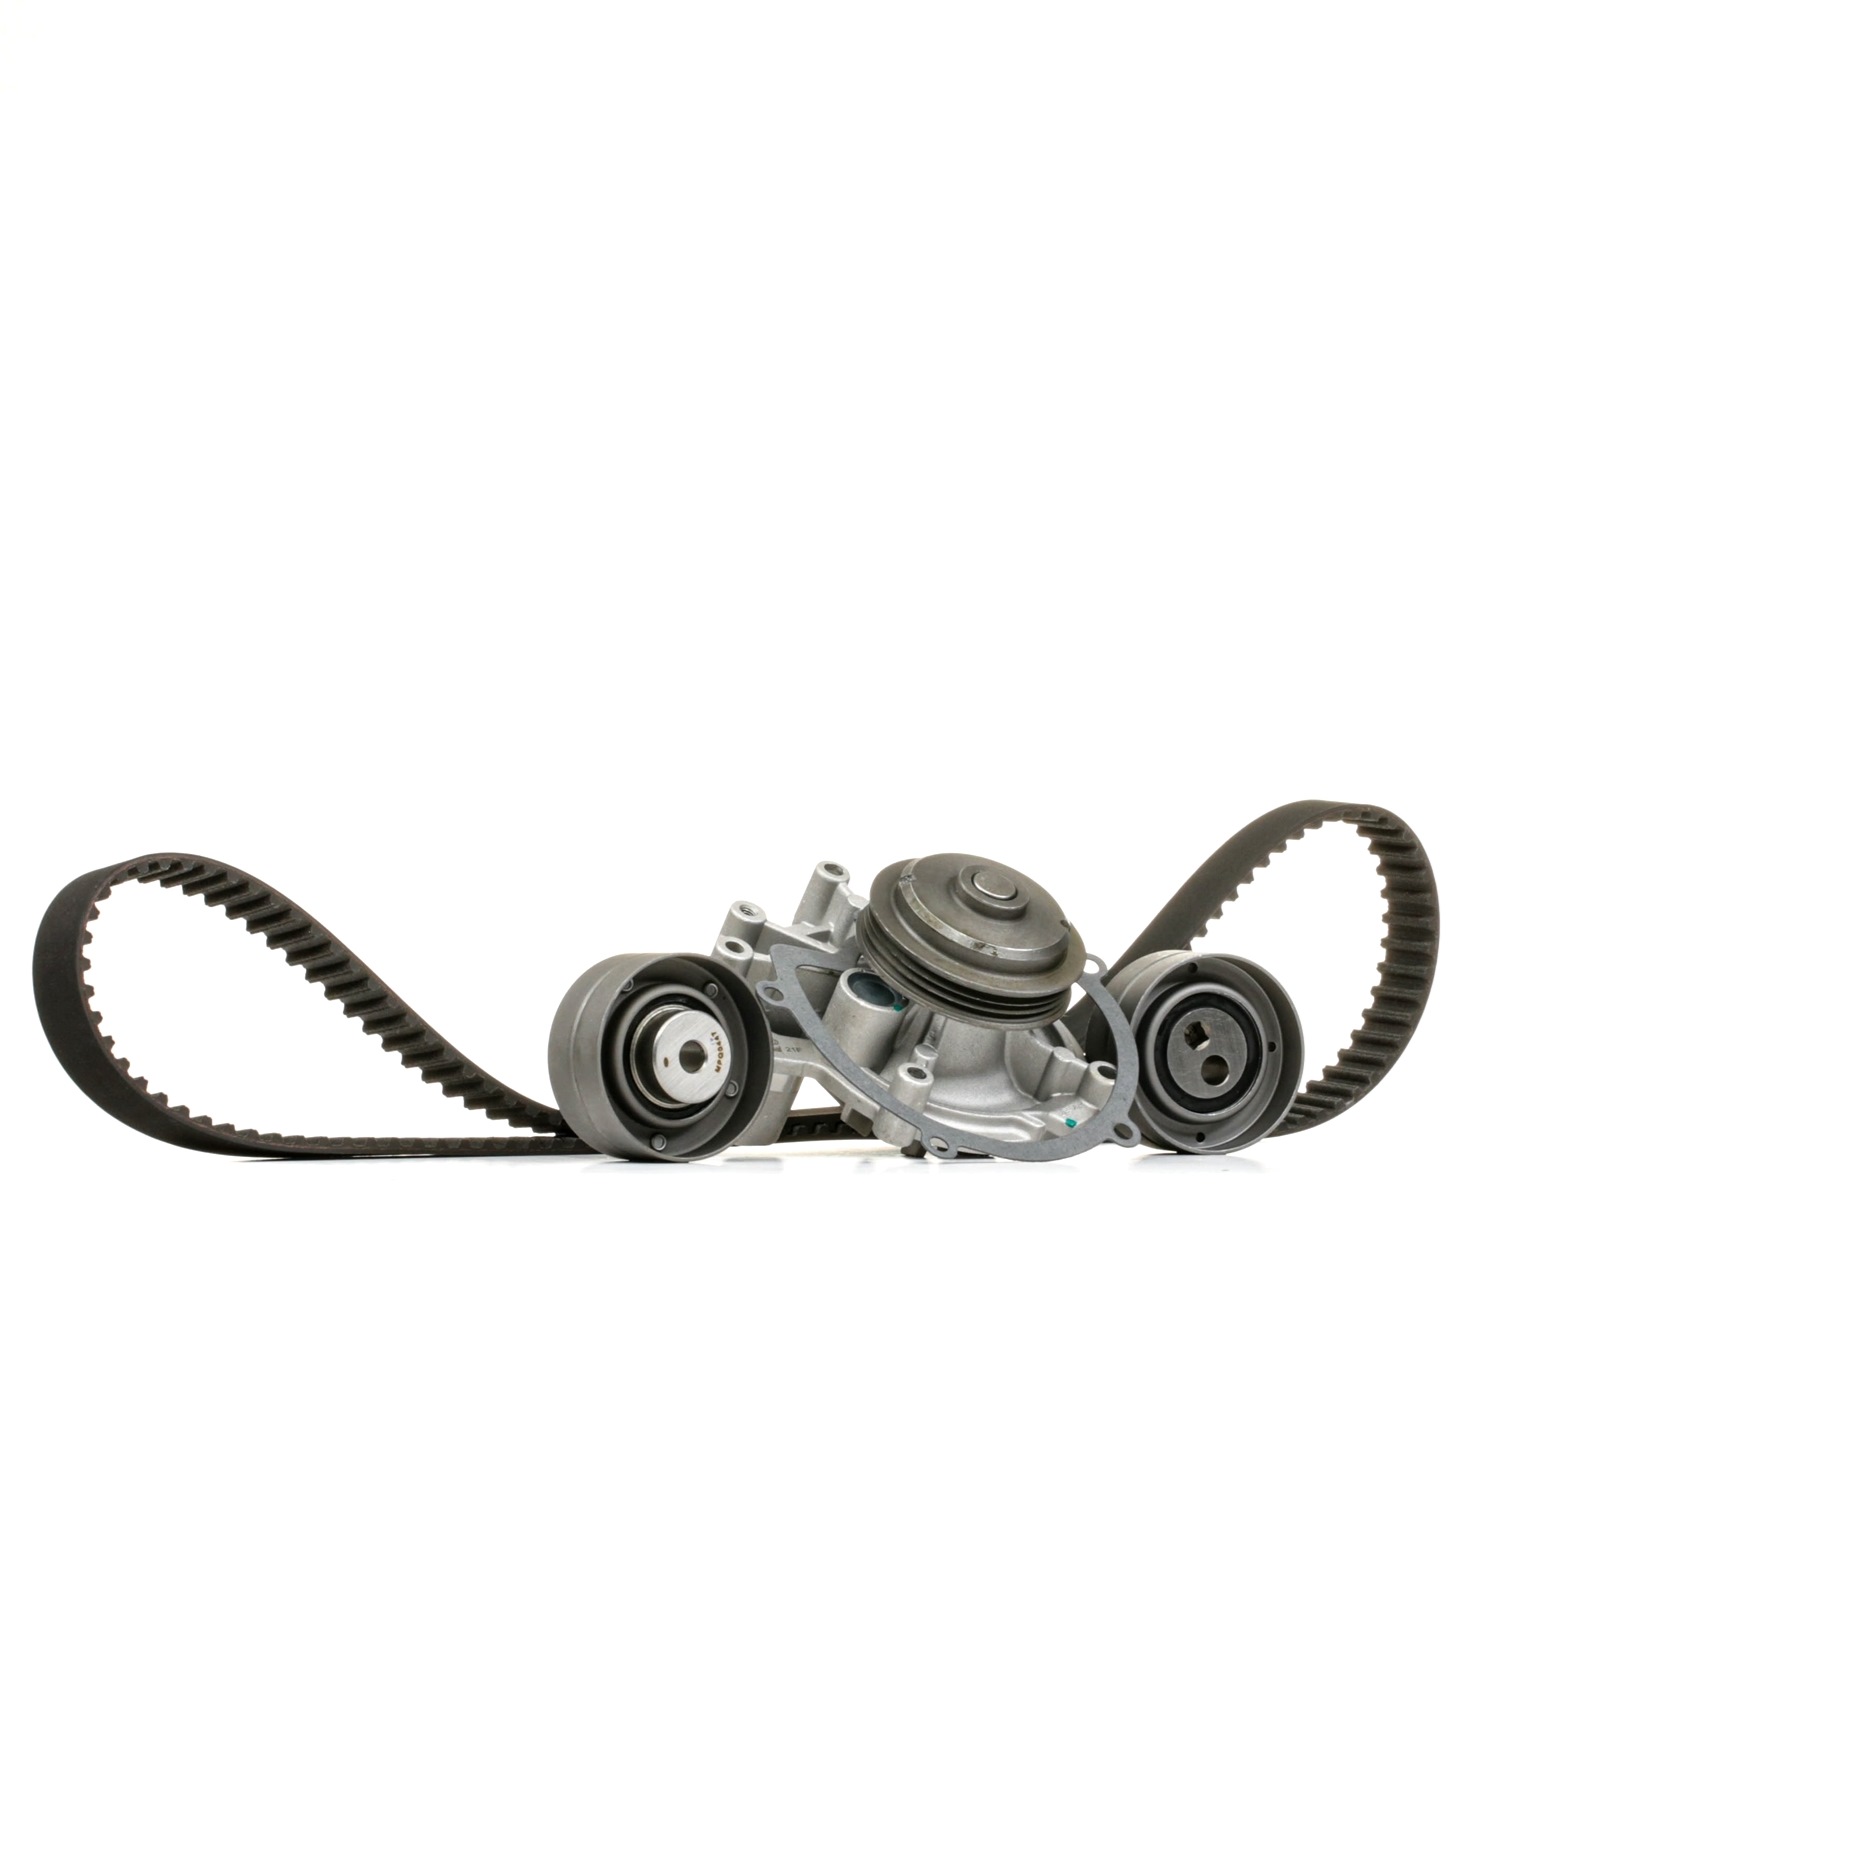 MAGNETI MARELLI 132011160004 Water pump and timing belt kit HONDA experience and price